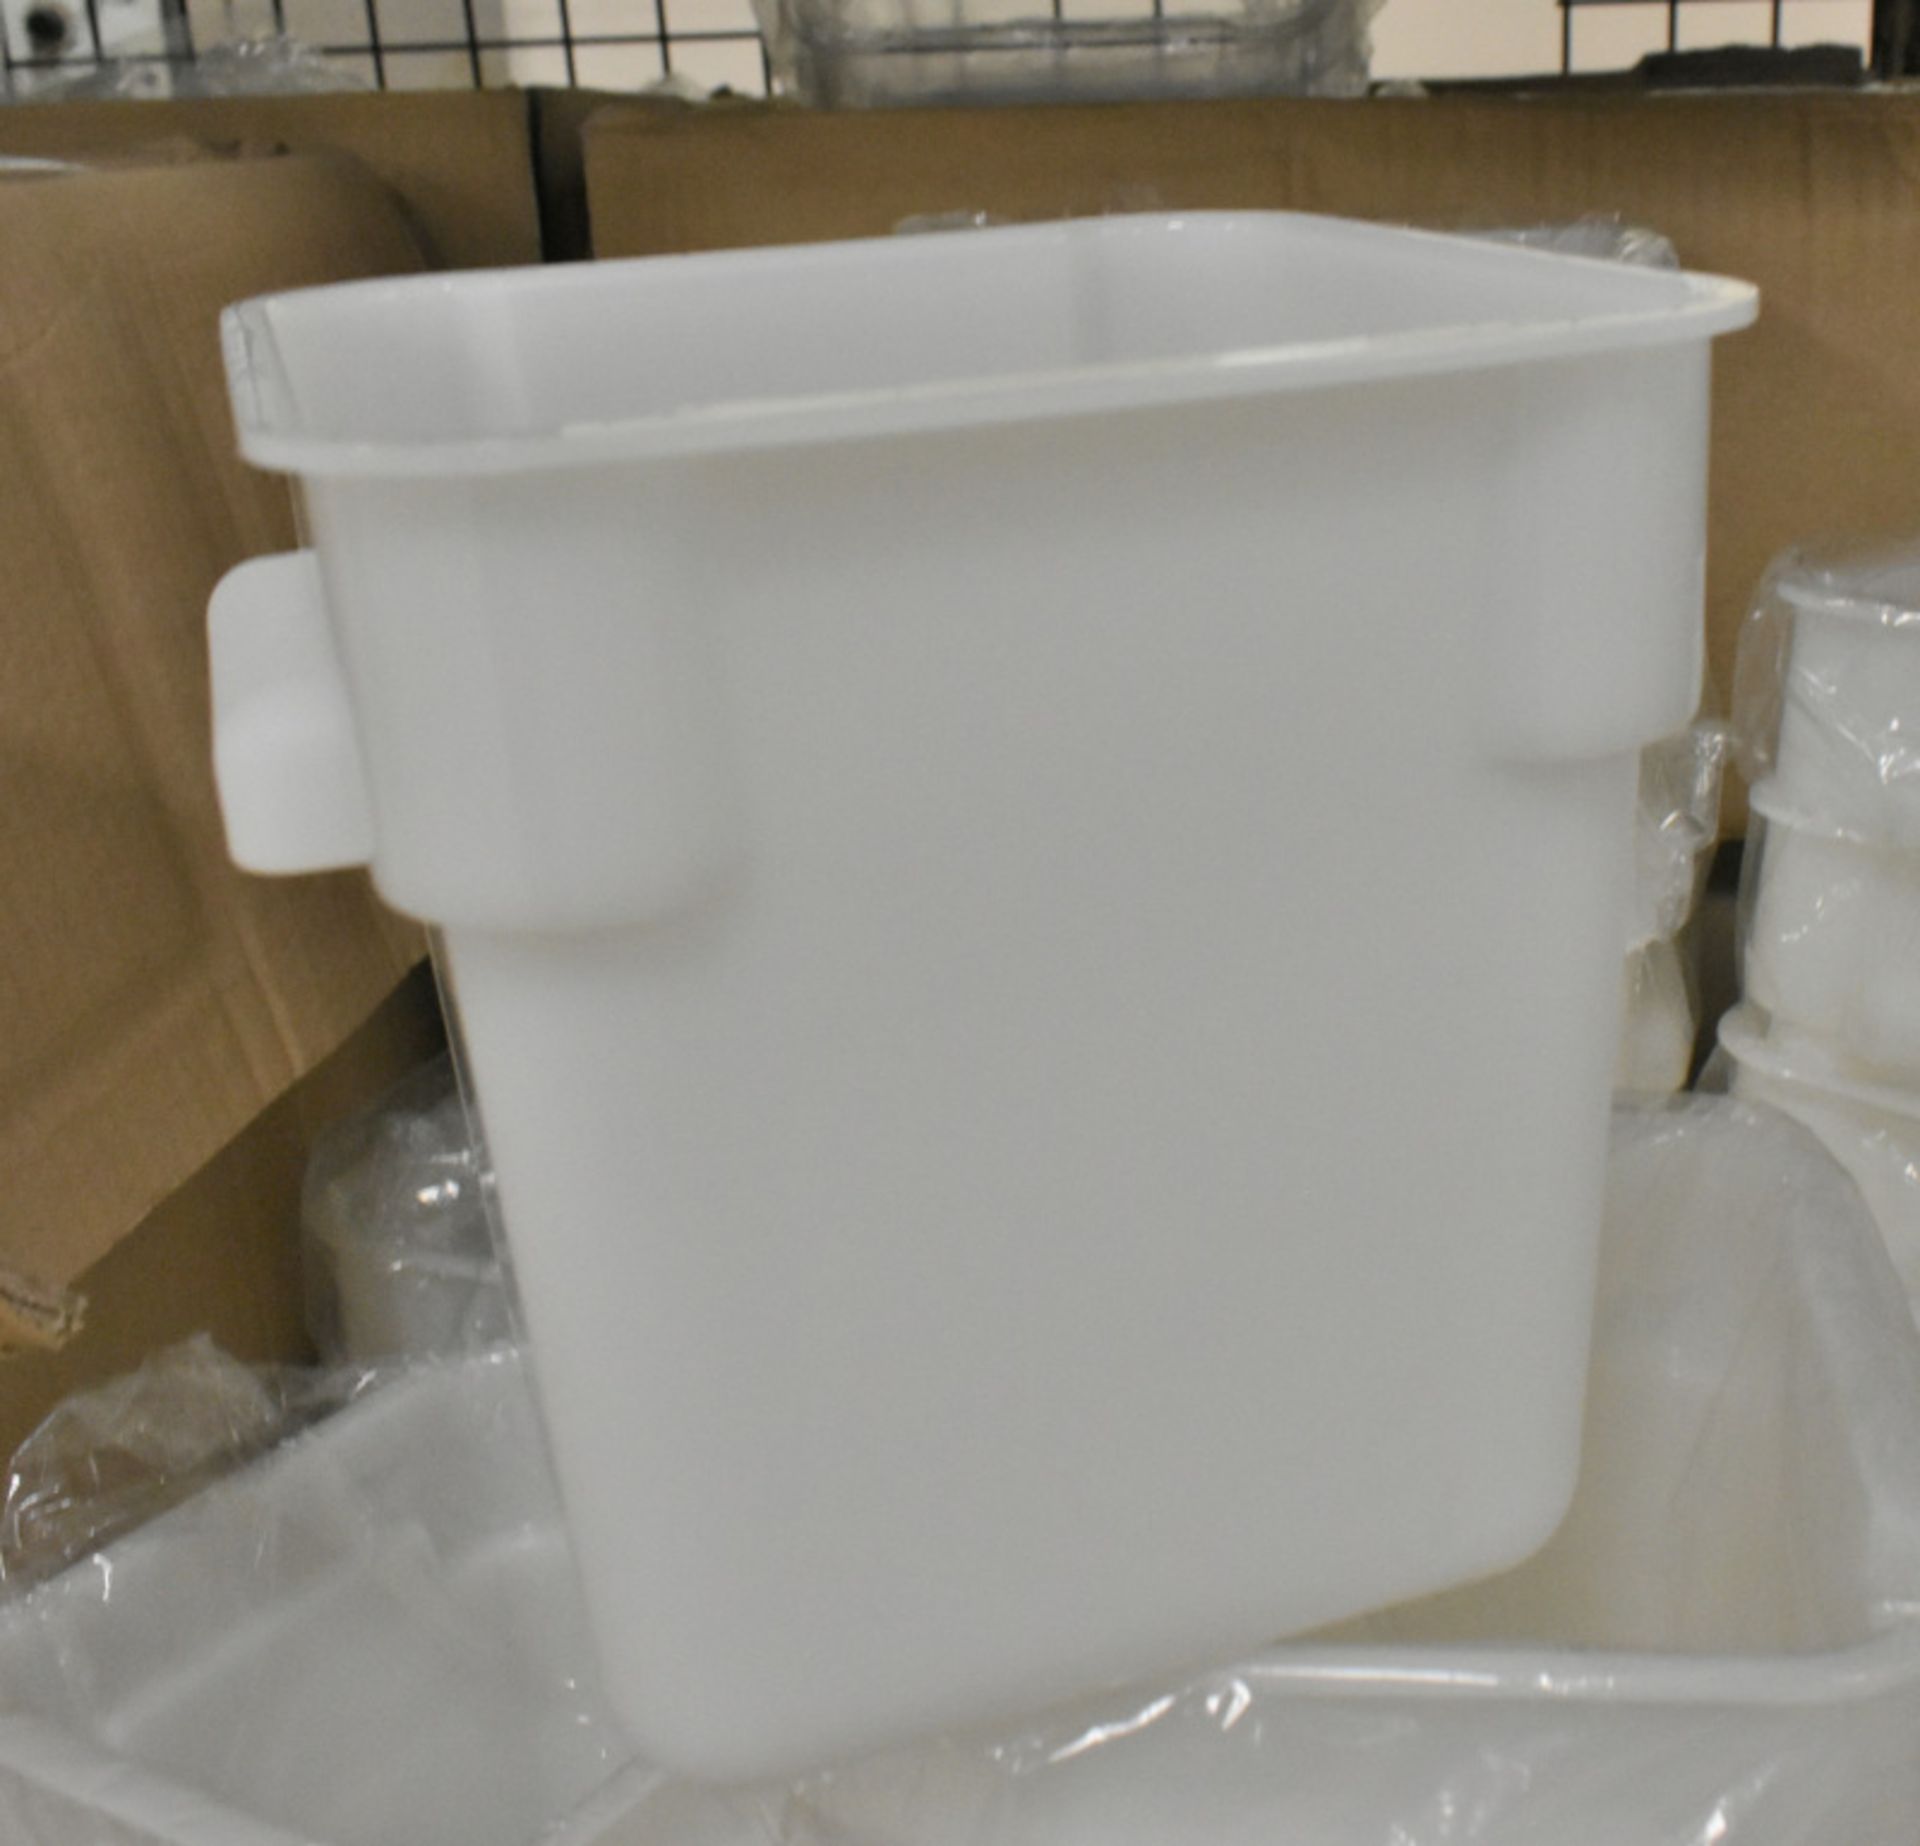 Various Catering Equipment - 72x Transworld Clear Plastic Containers, 23x White Plastic Tubs - Image 4 of 8